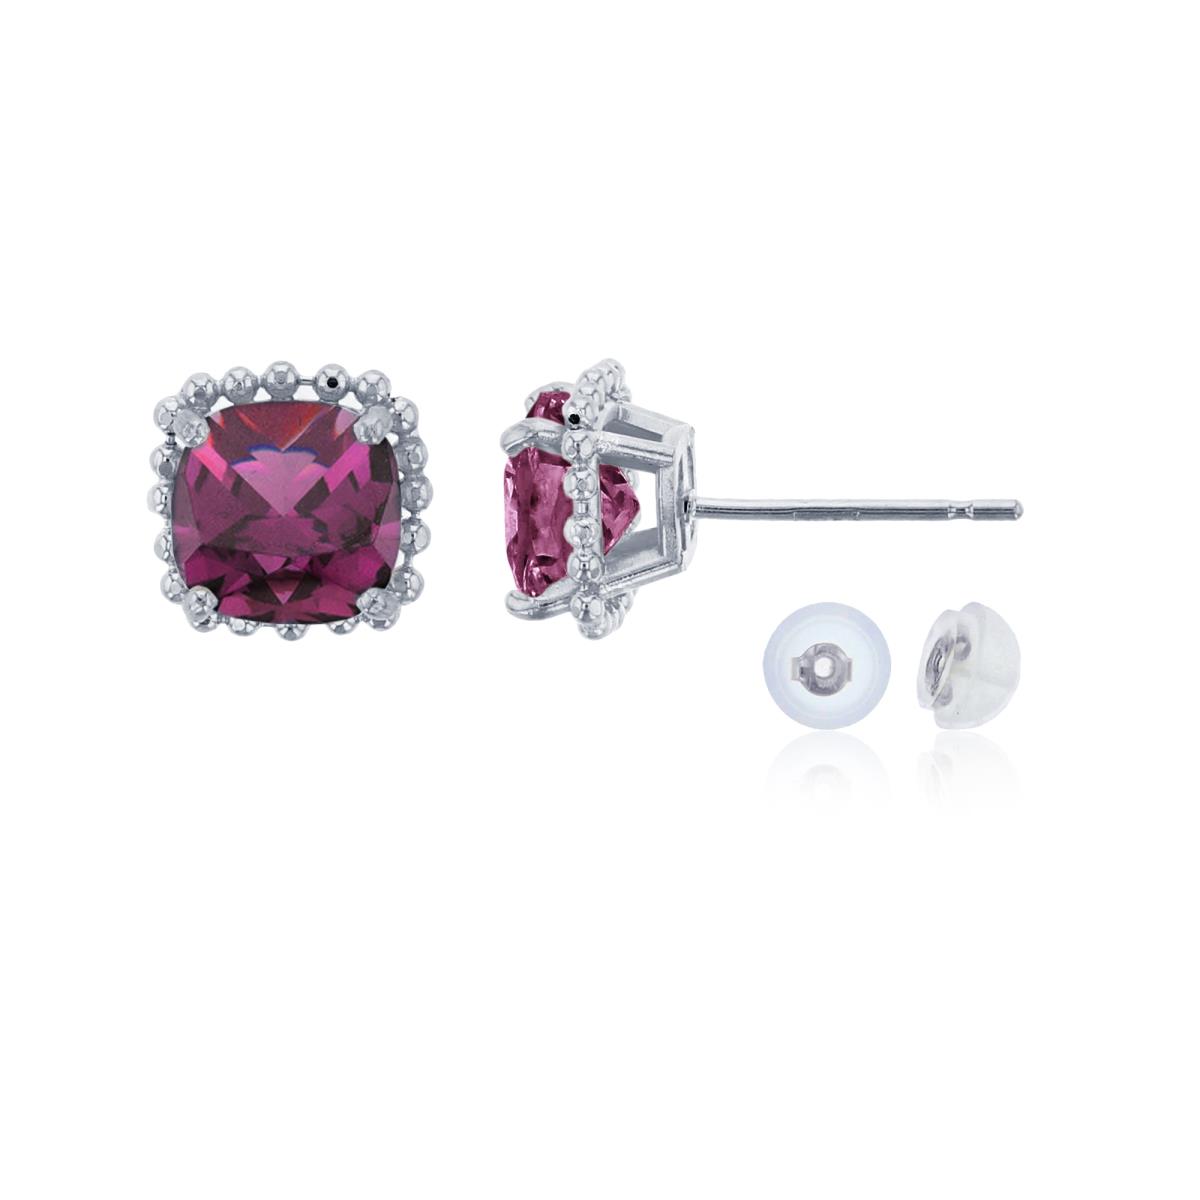 10K White Gold 6x6mm Cushion Cut Rhodolite Bead Frame Stud Earring with Silicone Back